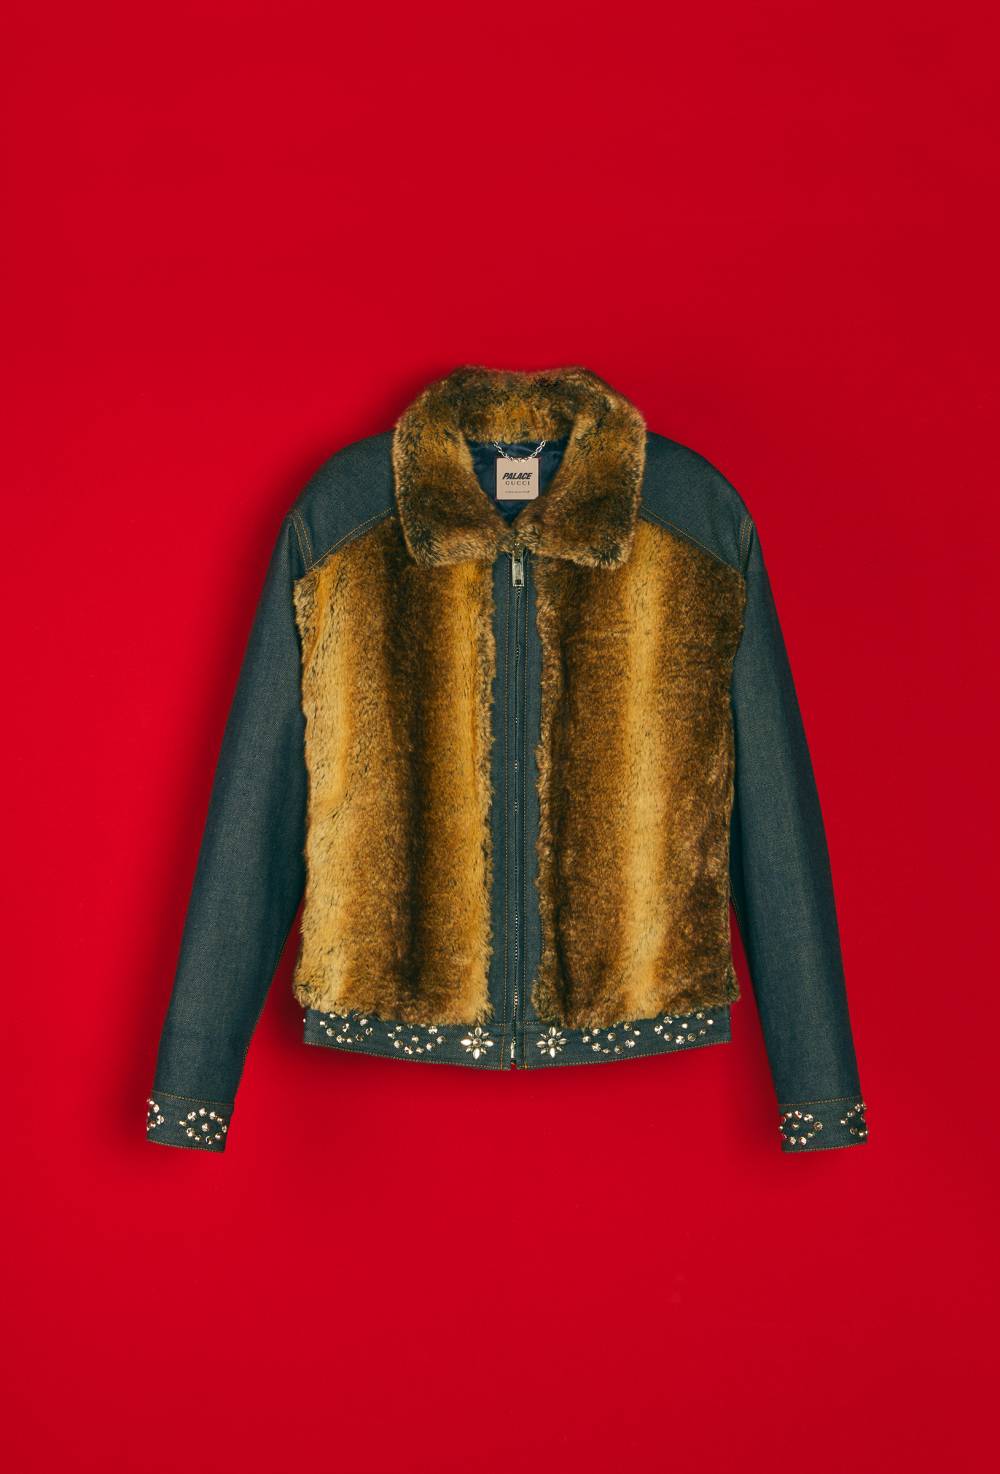 Denim jacket with faux fur, crystals and studs details by Palace Gucci image #1